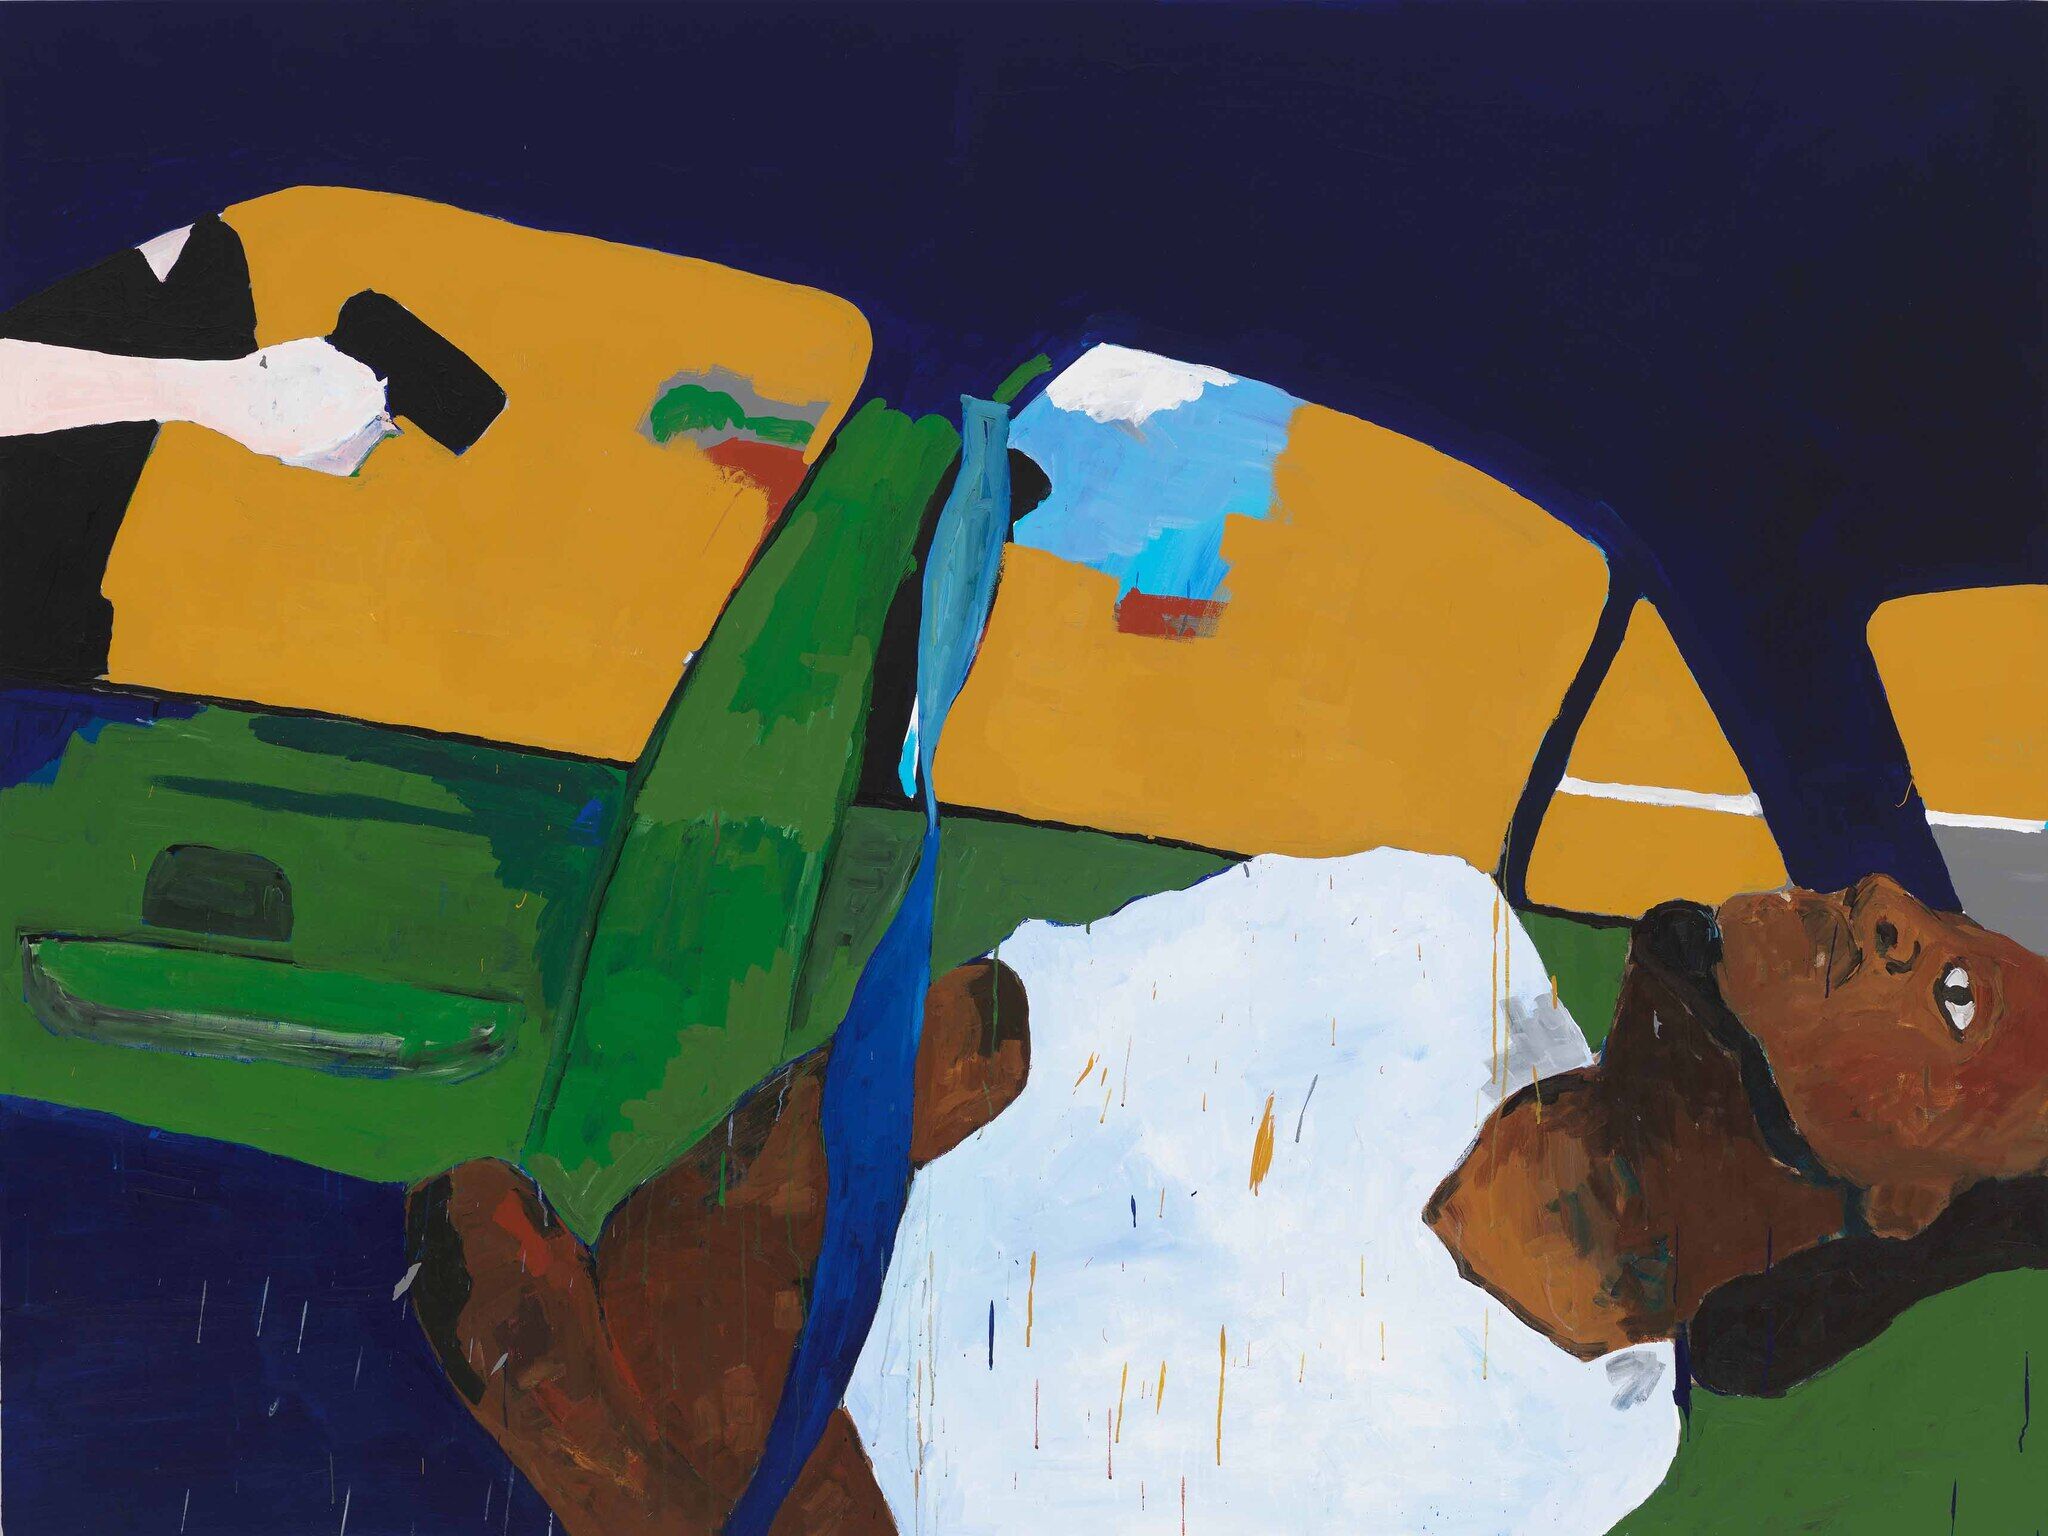 Painted from the viewpoint of the interior of a car, a Black man lays limply in the front seat. Through the car window, the arm and torso of a white police officer are visible. His gun is pointed at the Black man inside.